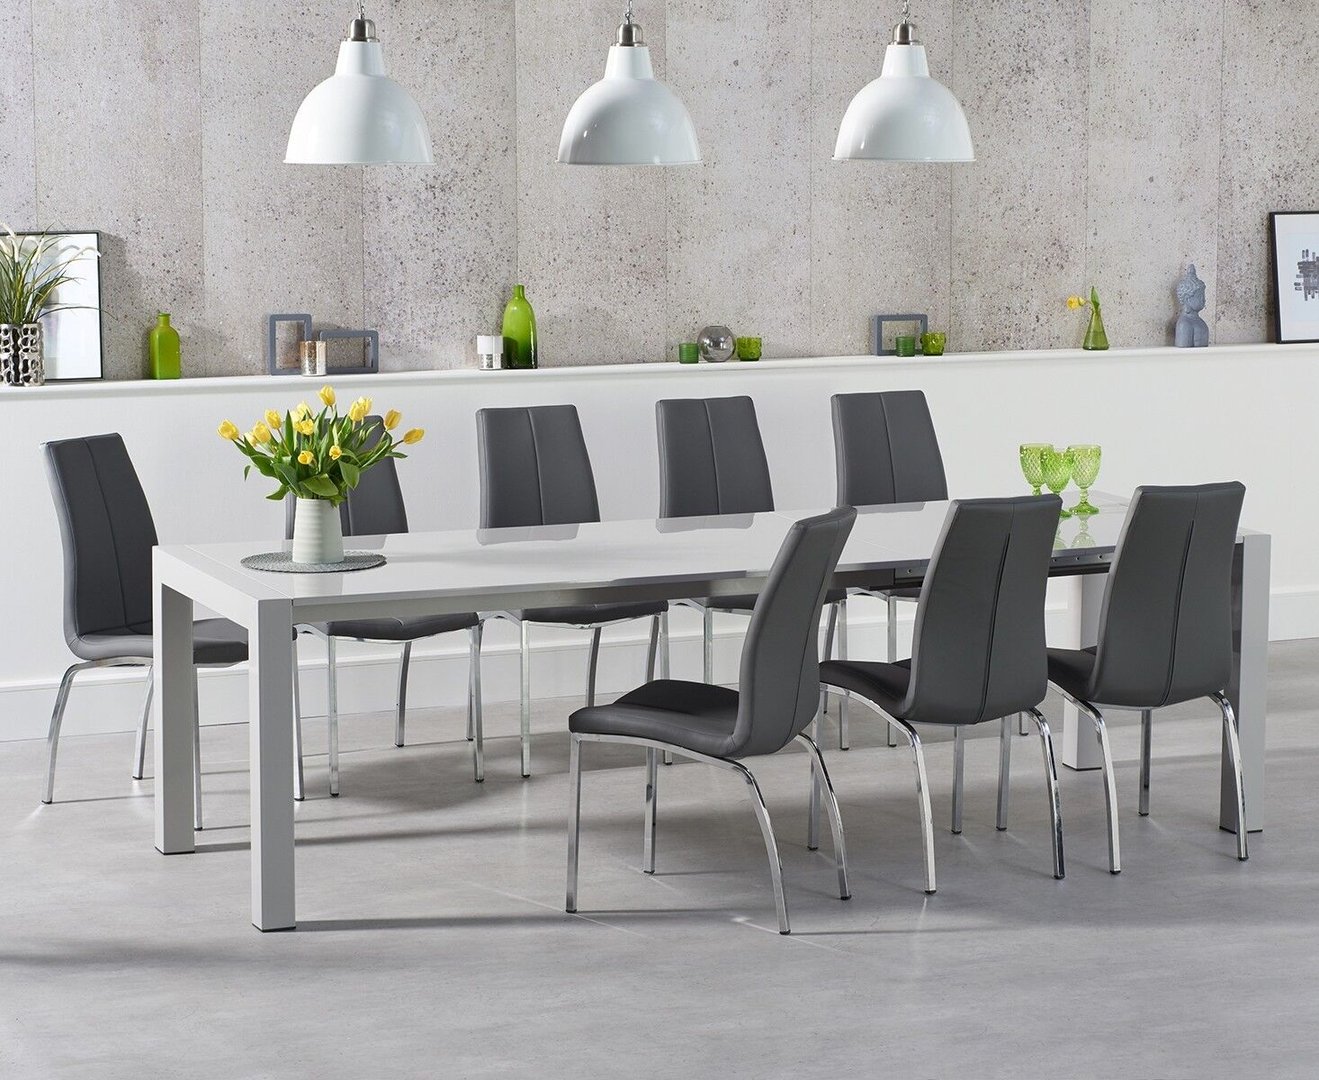 10 Seater Light Grey High Gloss Dining, Dining Table For 10